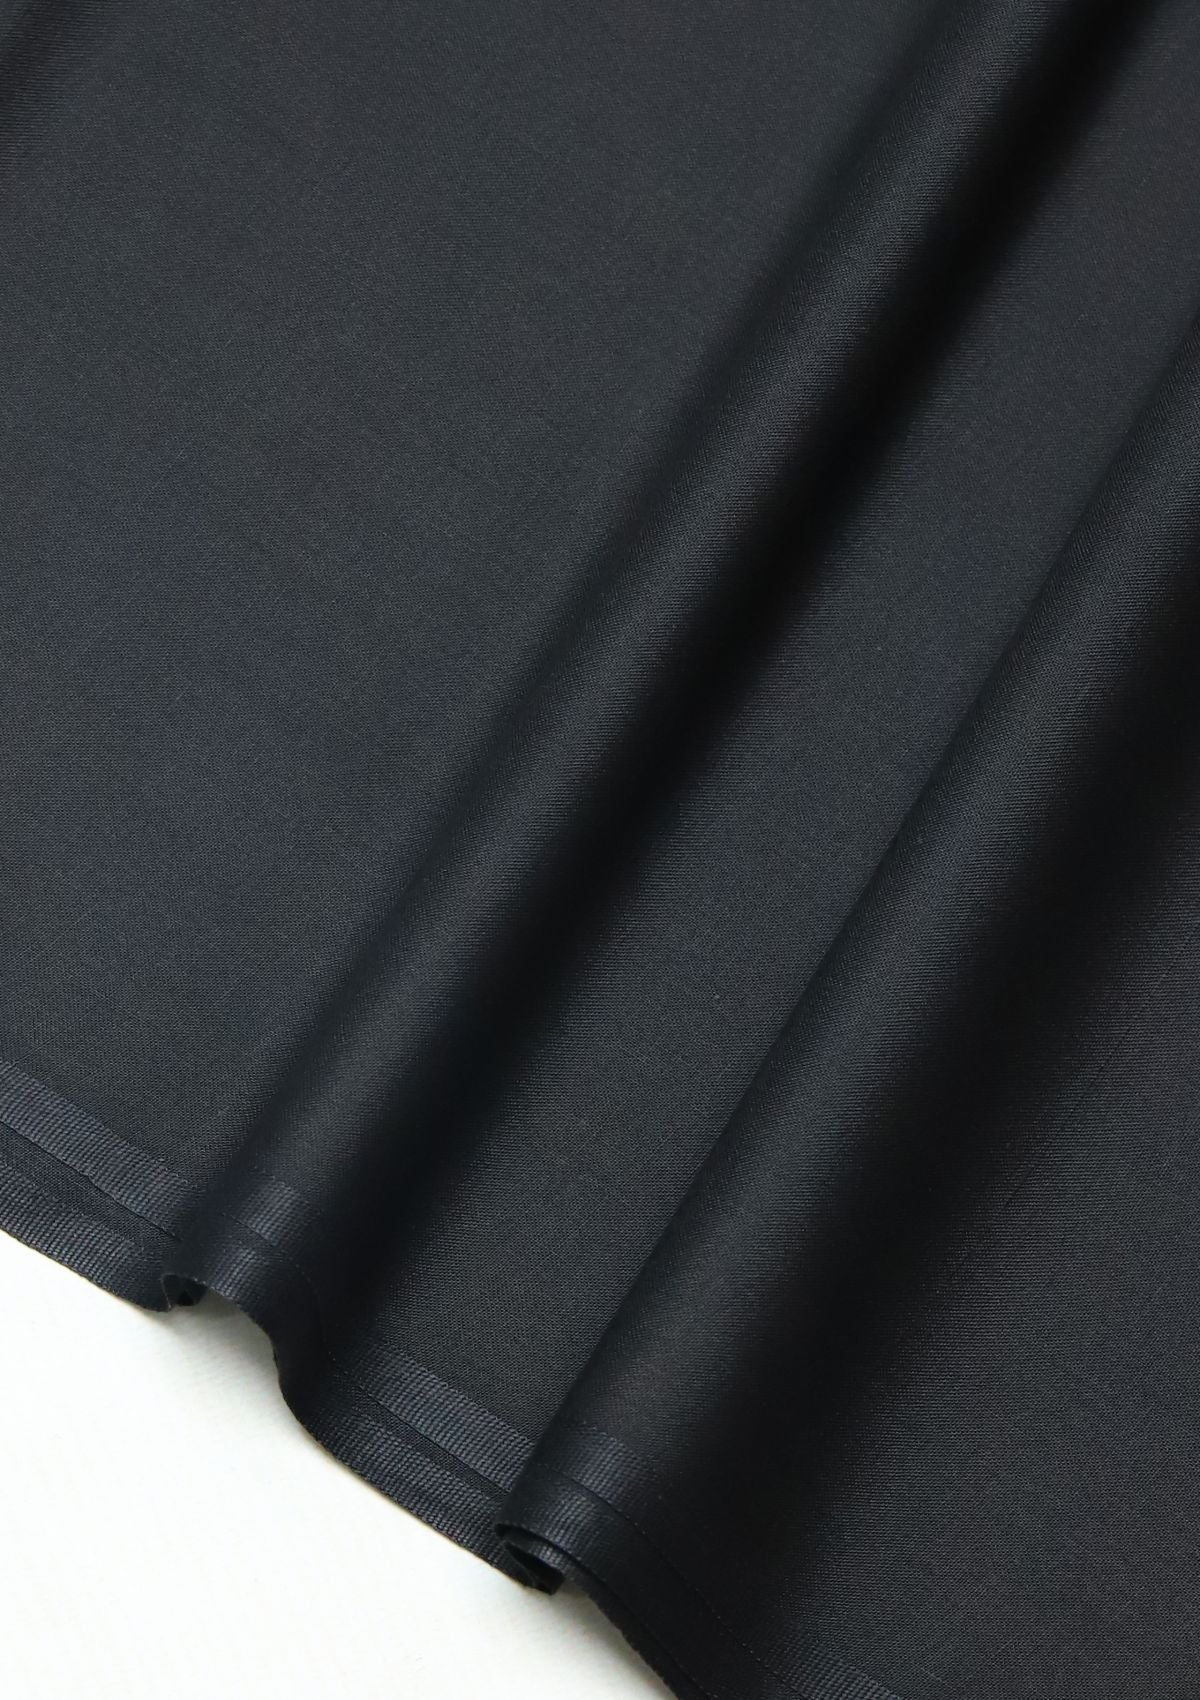 Saloon Wash N Wear Color (Black) available at Saleem Fabrics Traditions